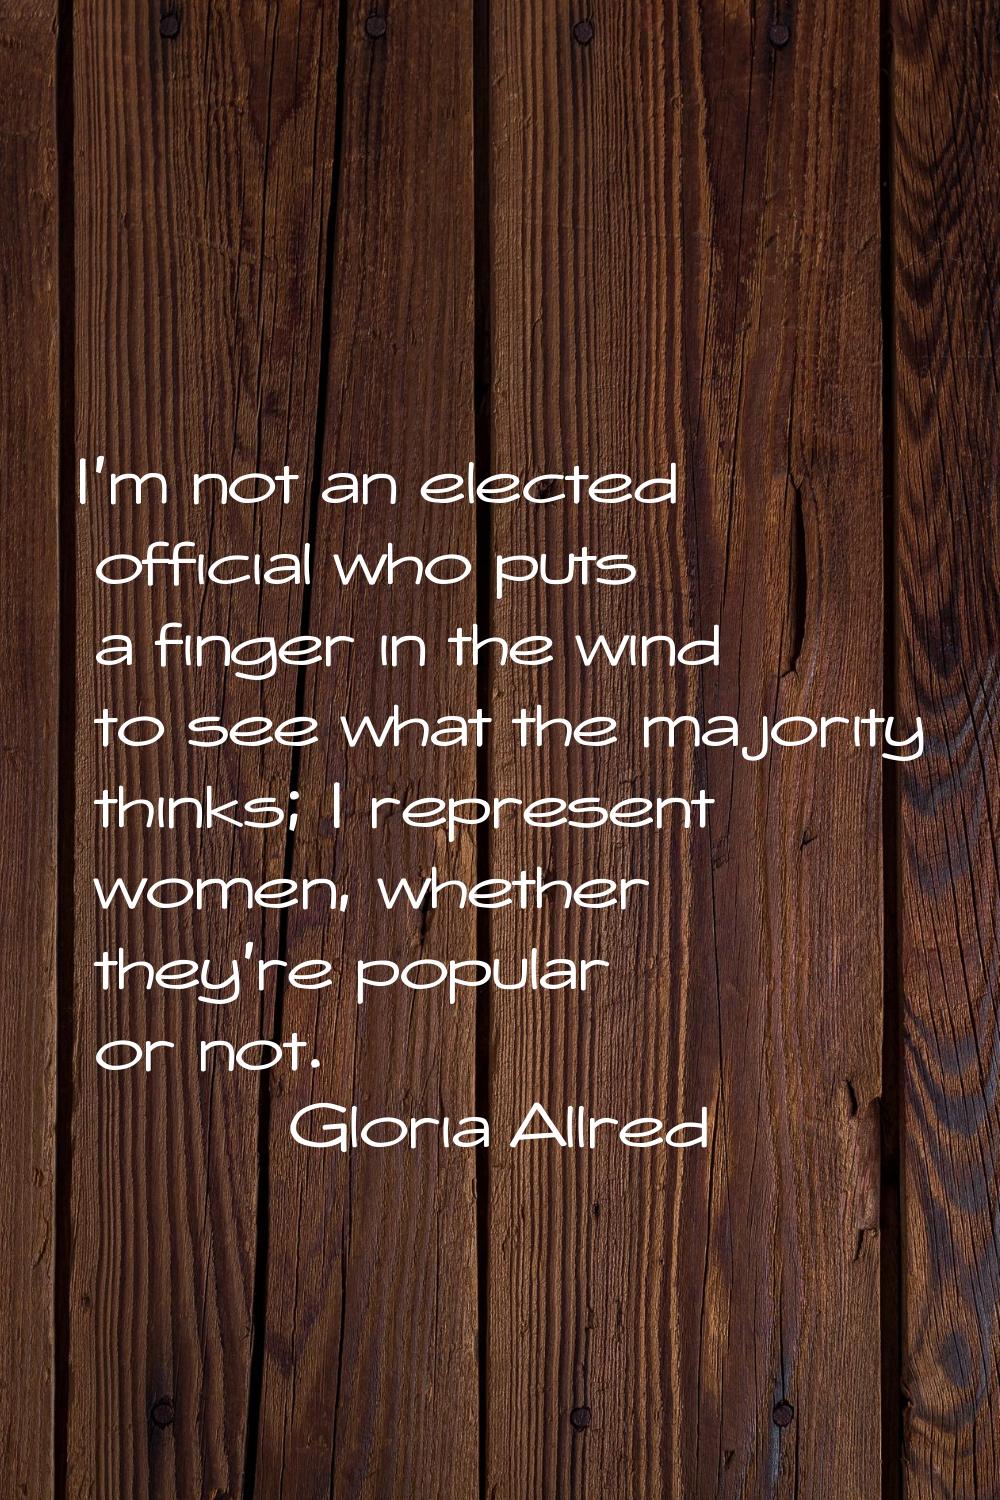 I'm not an elected official who puts a finger in the wind to see what the majority thinks; I repres